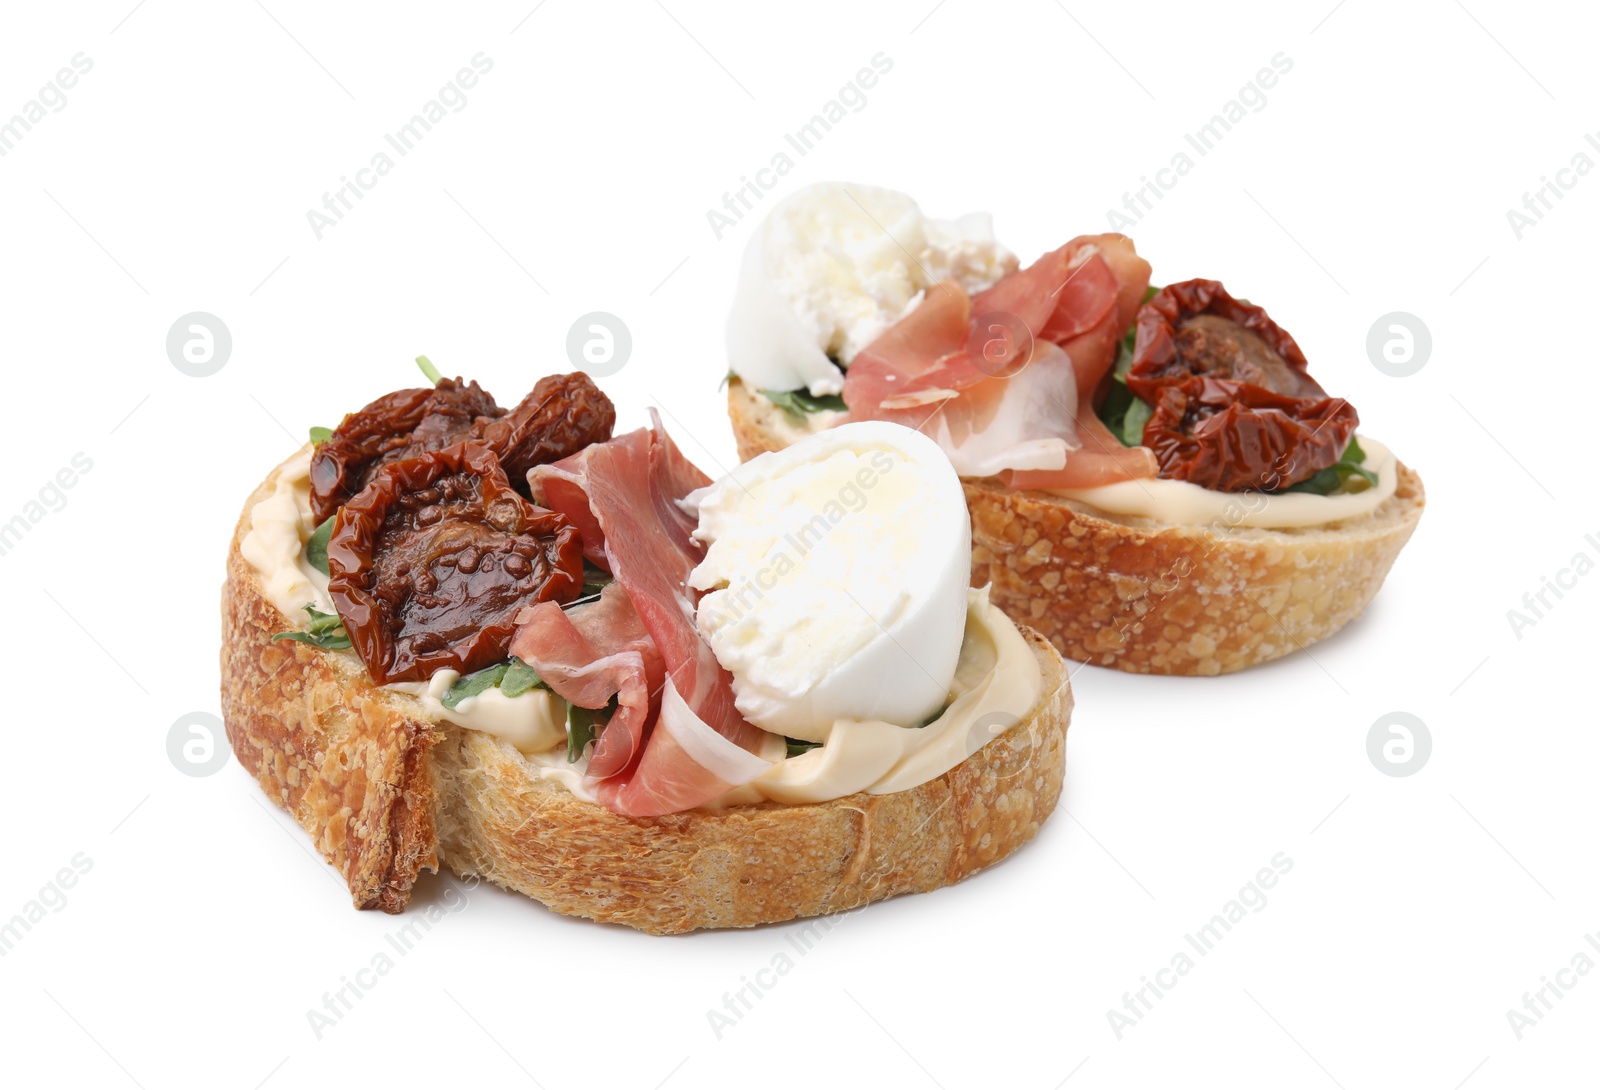 Photo of Delicious sandwiches with burrata cheese, ham and sun-dried tomatoes isolated on white